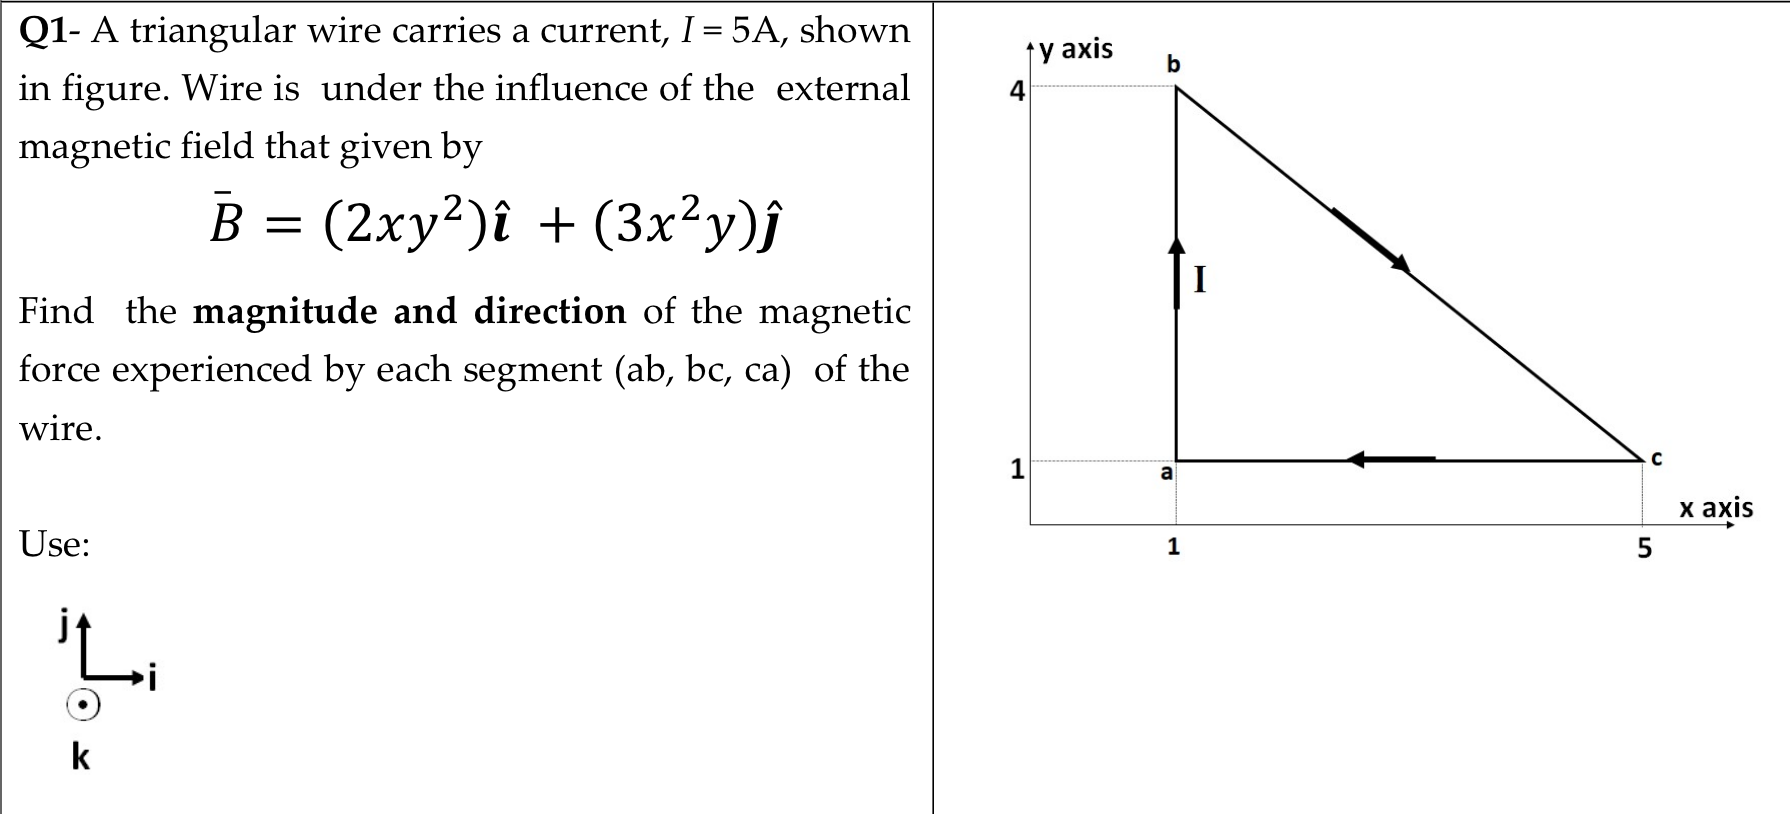 Q1- A triangular wire carries a current, I= 5A, shown
ty axis
b
in figure. Wire is under the influence of the external
magnetic field that given by
B = (2xy²)î + (3x²y)j
I
Find the magnitude and direction of the magnetic
force experienced by each segment (ab, bc, ca) of the
wire.
1
a
х ахis
Use:
5
jt
k
